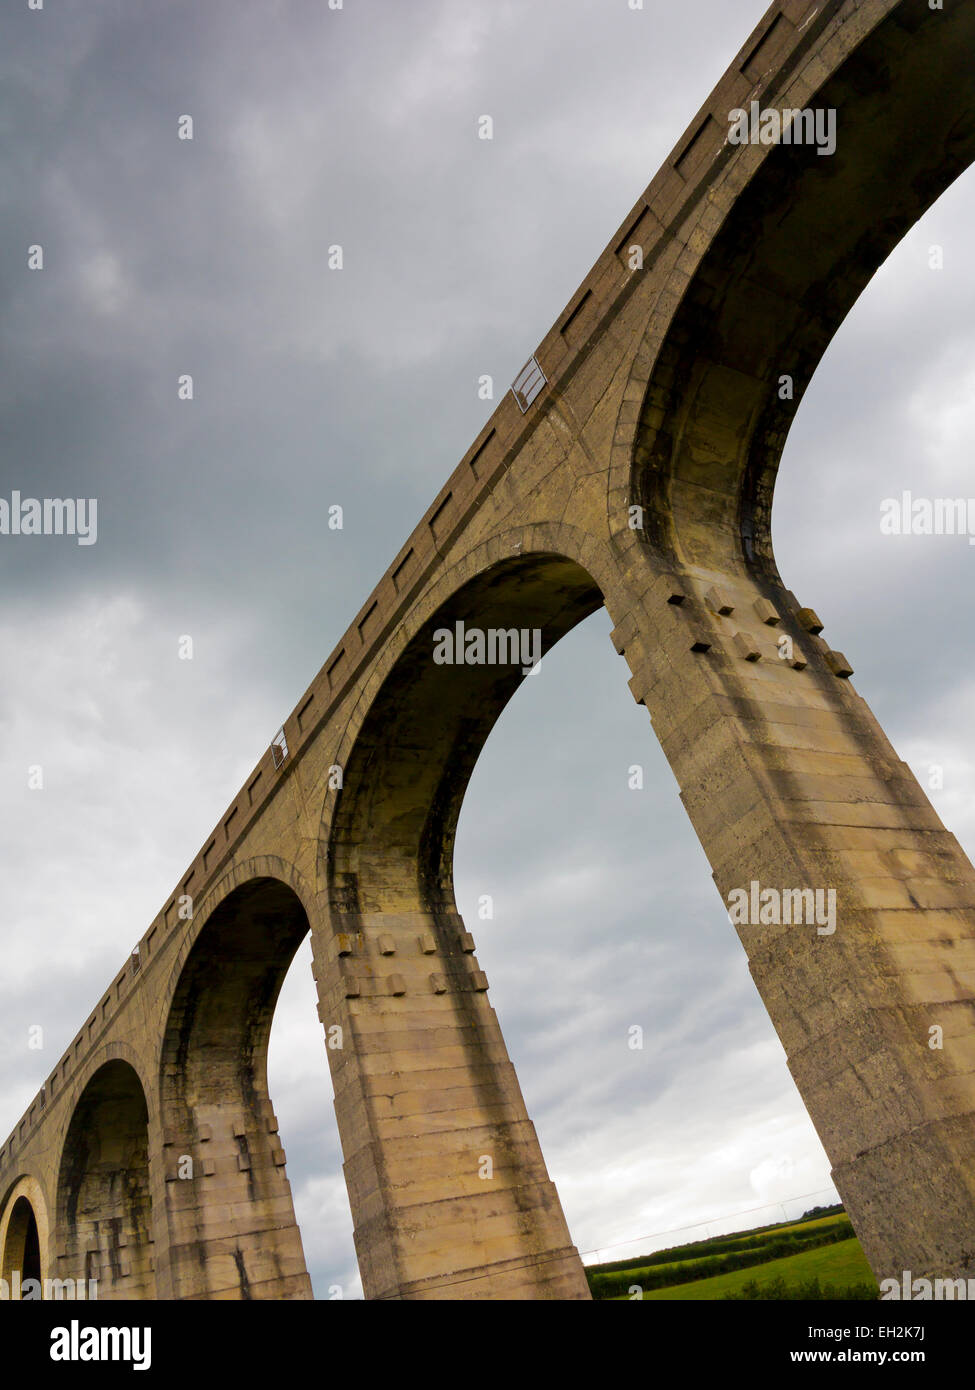 Cannington Viaduct near Uplyme opened 1903 on the Axminster to Lyme Regis railway branch line showing close up detail of arches Stock Photo